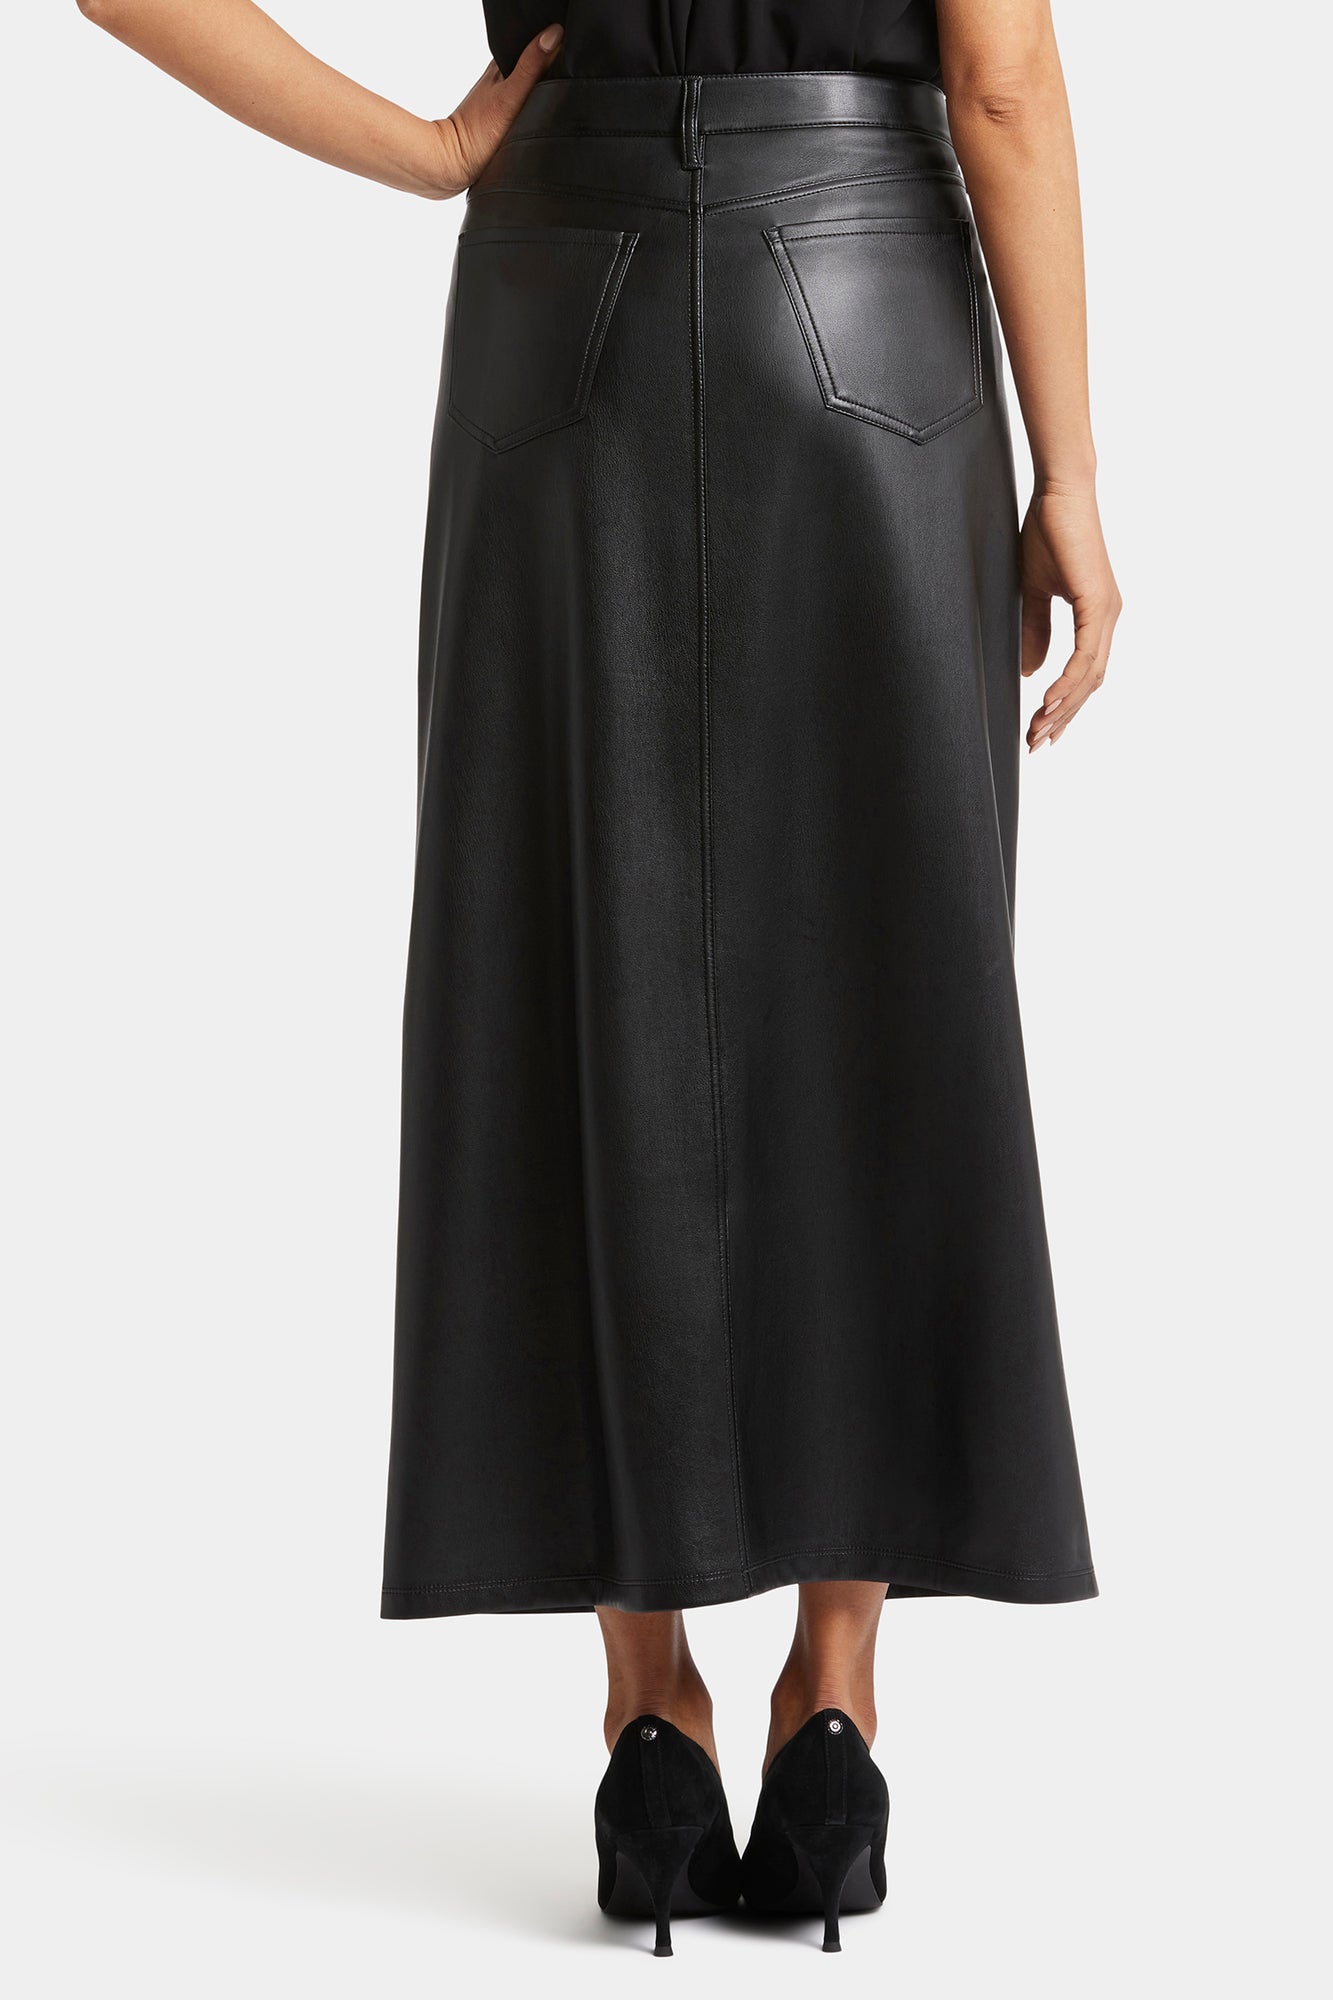 NYDJ Vegan Stretch Leather High Rise Long Skirt Sculpt-Her™ Collection - Black